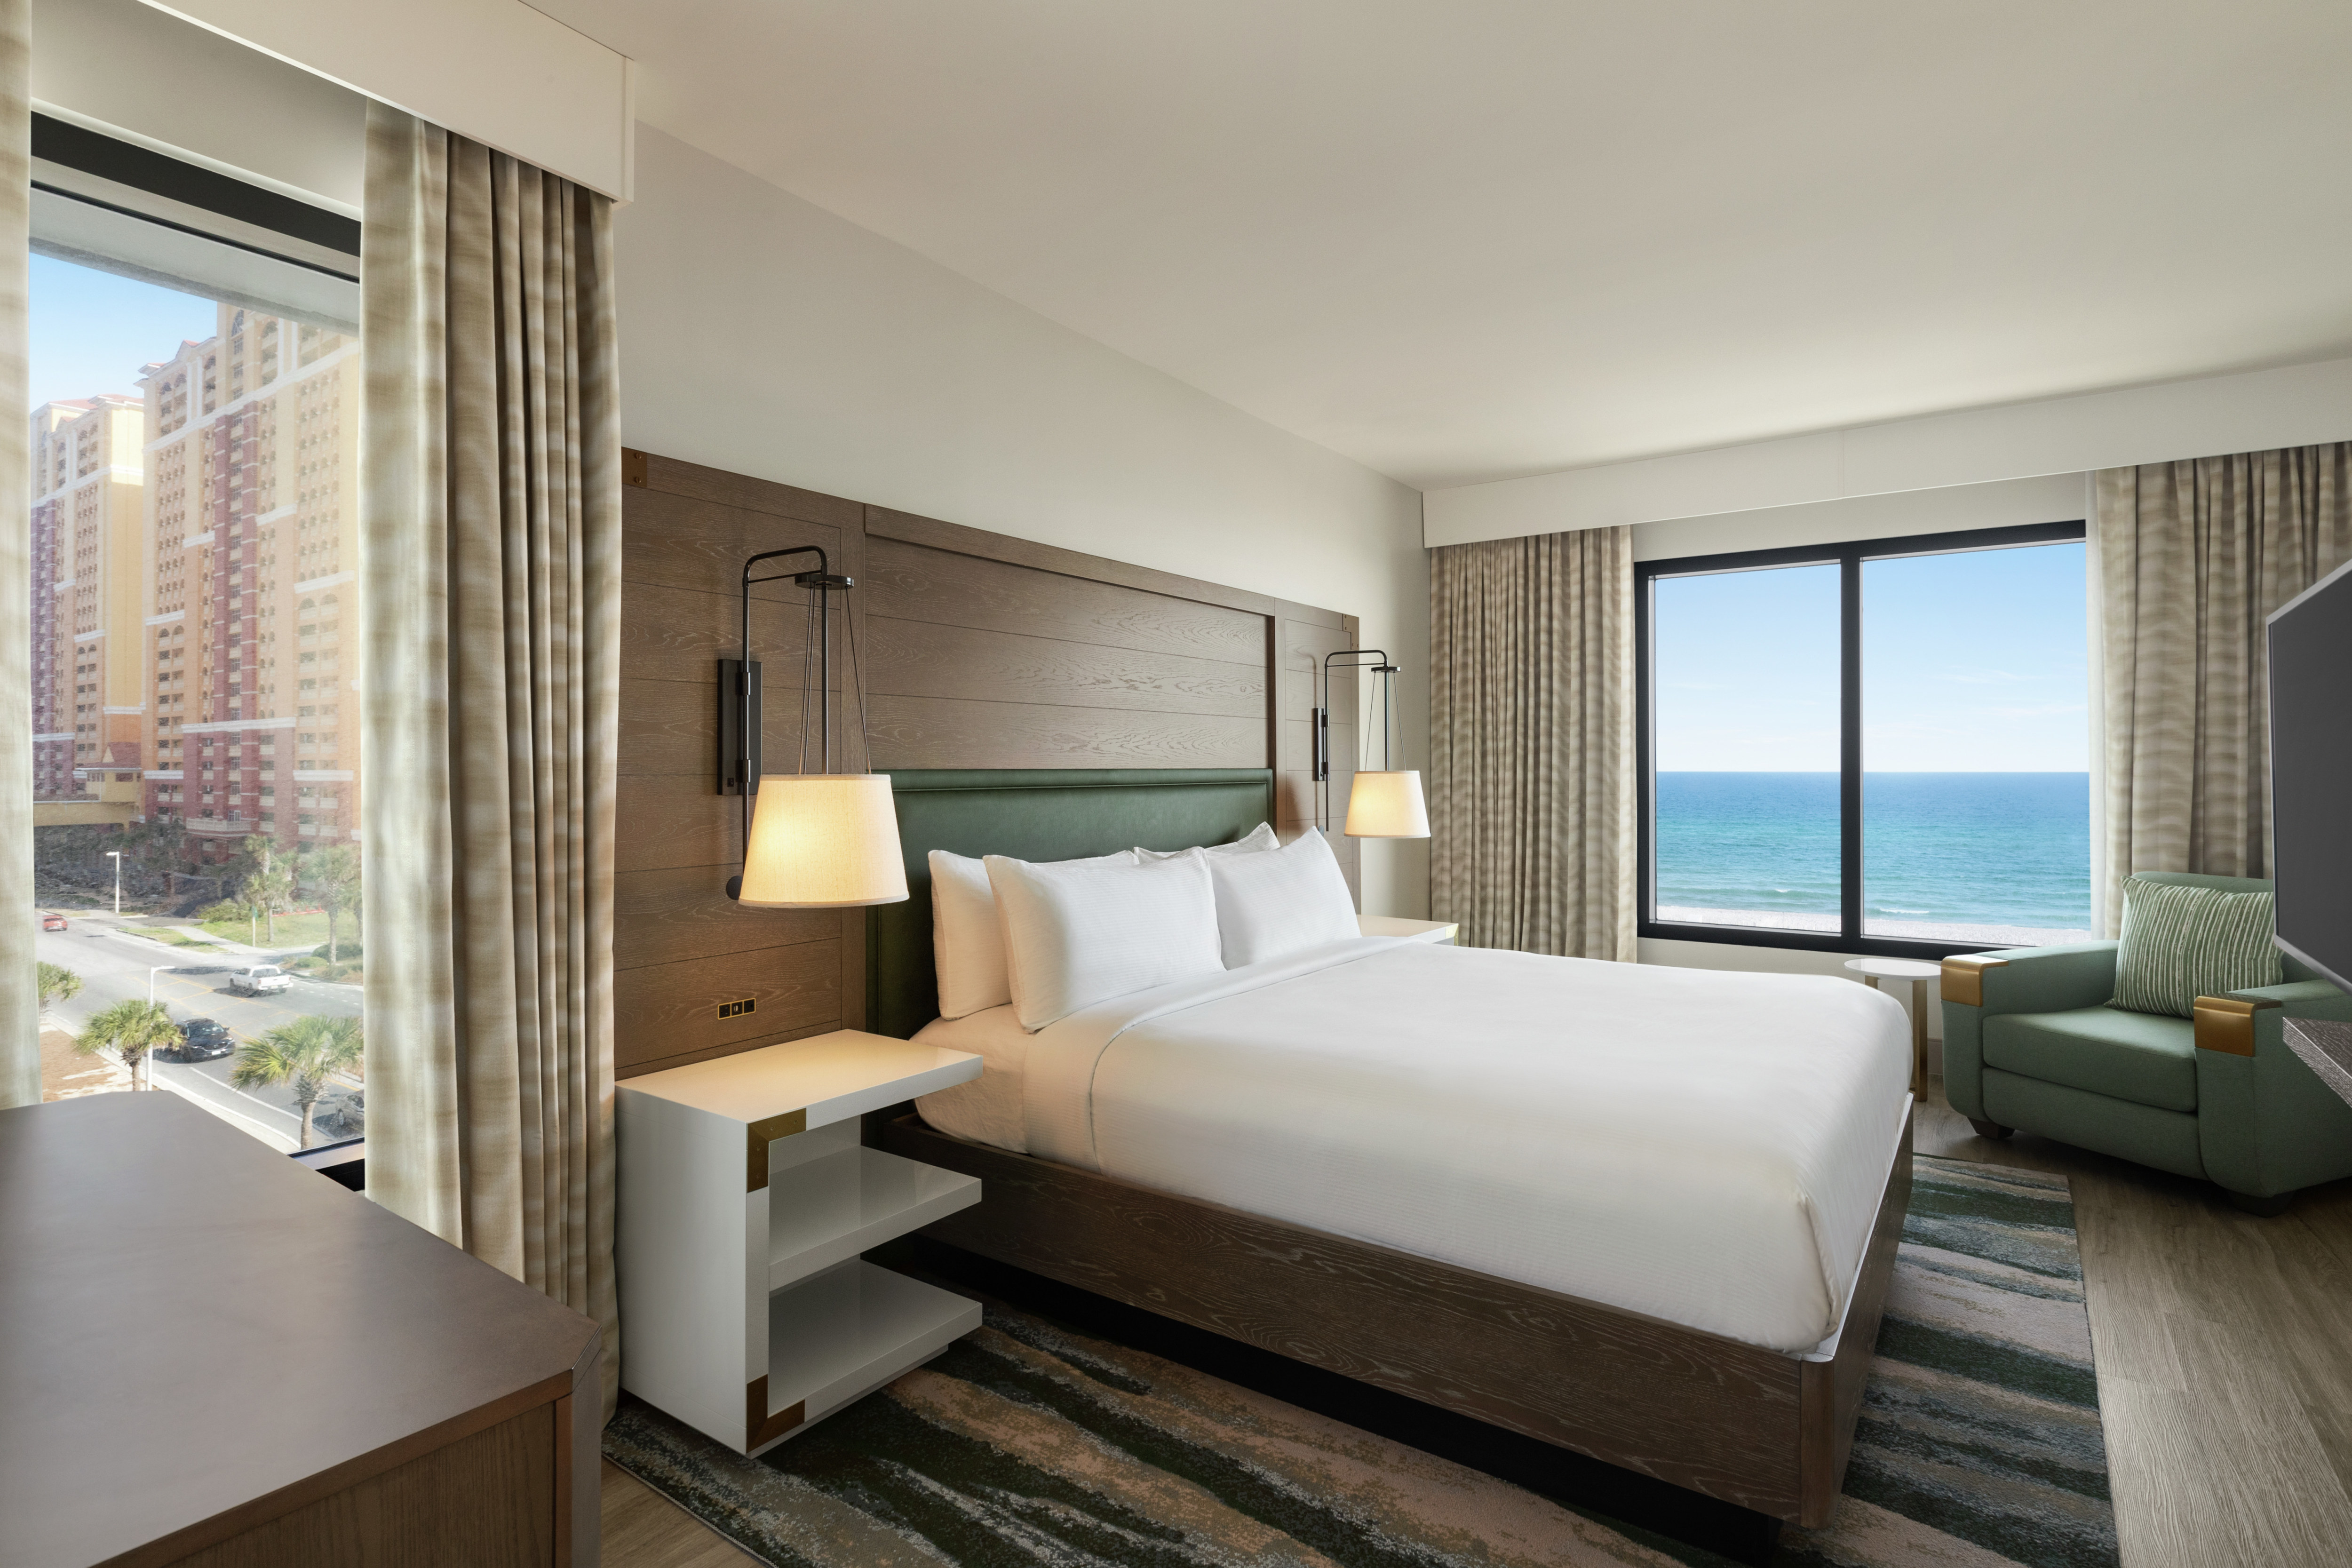 Spacious guest room featuring plush king bed and resort styling with stunning ocean and local views